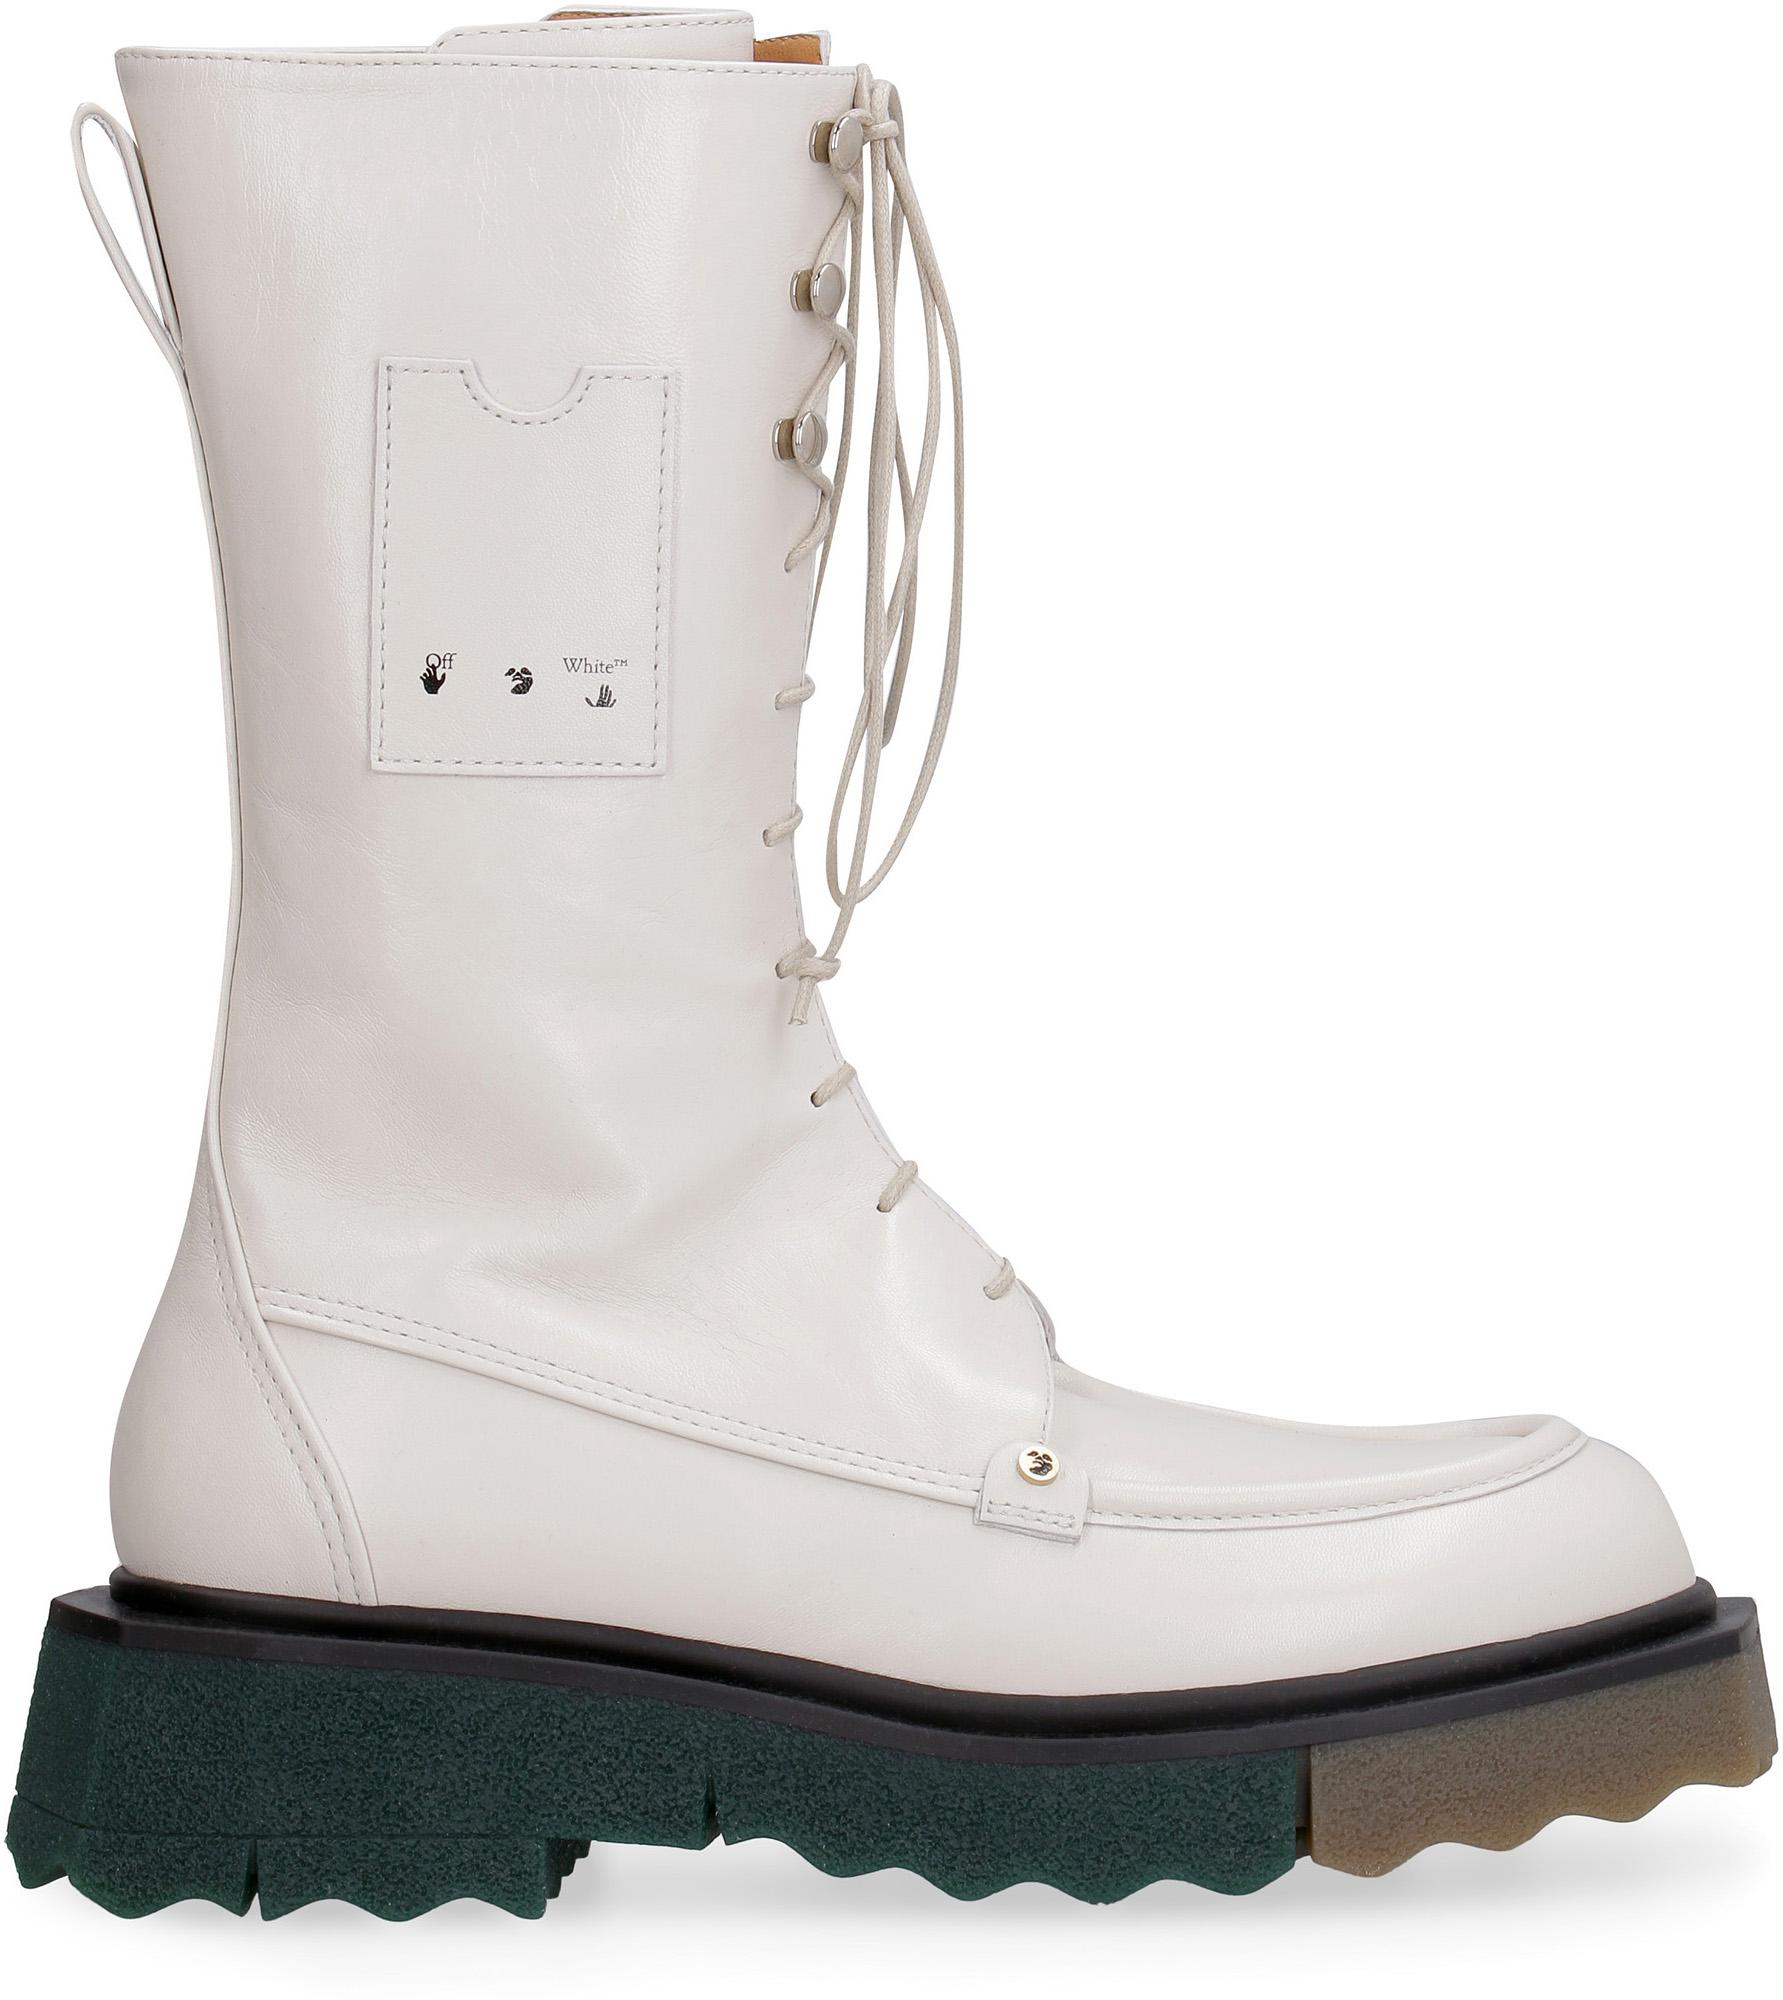 Off-White c/o Virgil Abloh Sponge Combat Leather Combat Boots in White |  Lyst